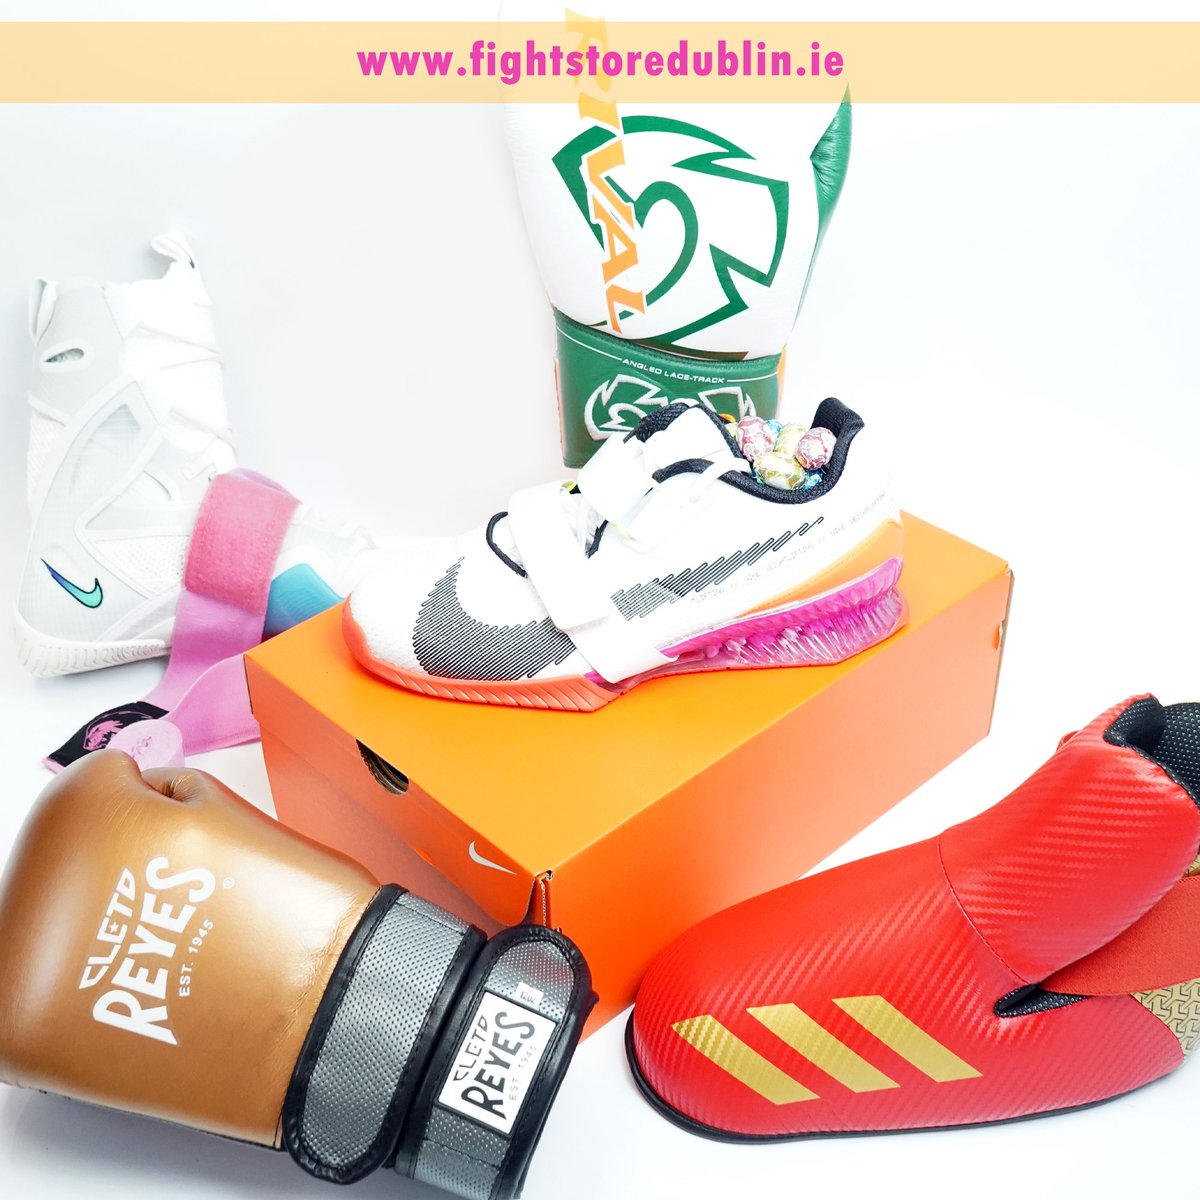 Happy Easter 🐣 from #fightstoreireland 
#thefighterschoice® 
#rivalboxing #nike #nikeweightlifting #Nikeboxing #cletoreyes #hechoenmexico #adidas #adidaskickboxing #boxe #boxeo #boxen #weightlifting #kickboxing 
FightStoreDublin.ie